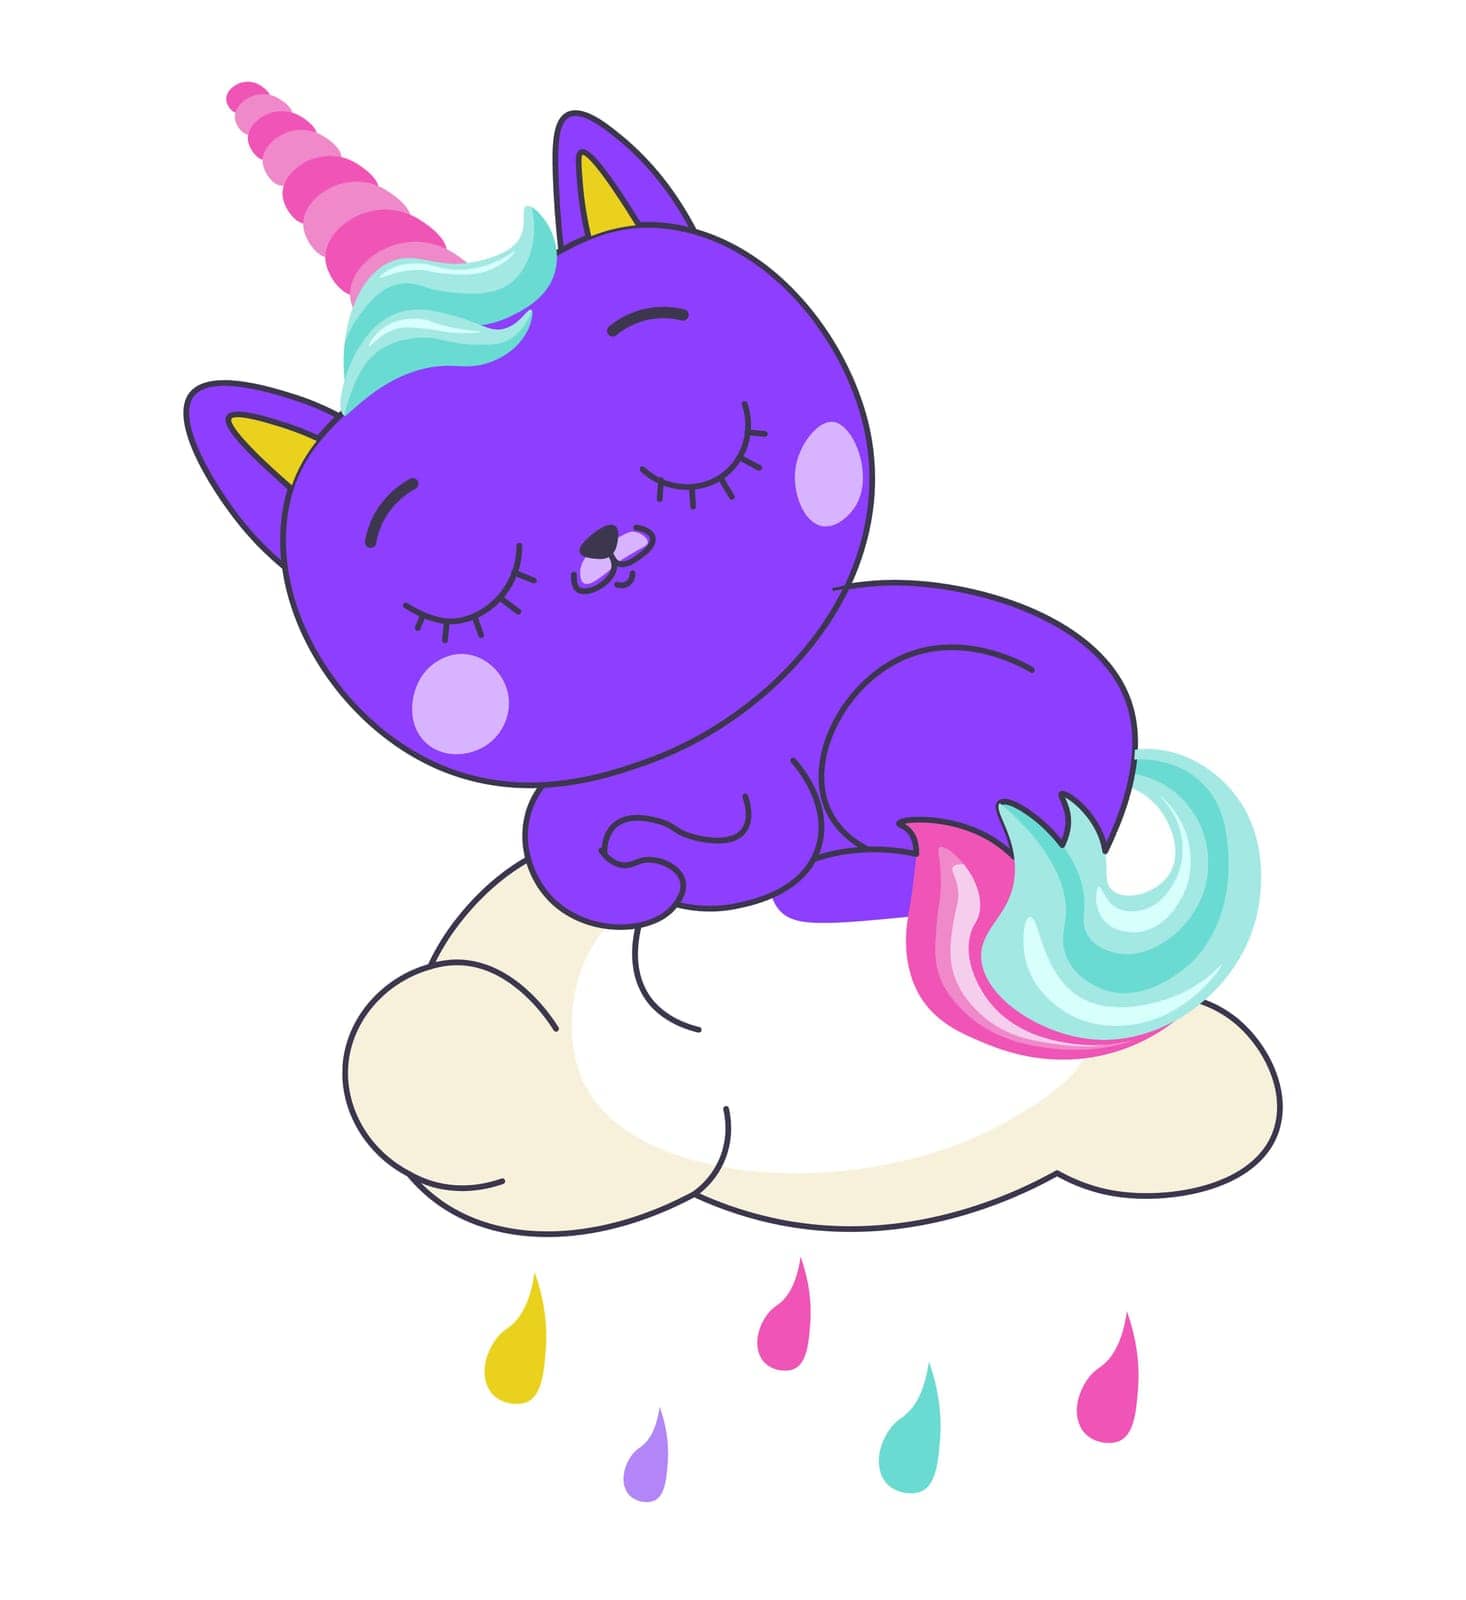 Kitty with unicorn horn and rainbow tail sleeping or taking nap on fluffy cloud with raindrops. Cloudscape and colorful rain, isolated cute mascot, character or sticker. Vector in flat style